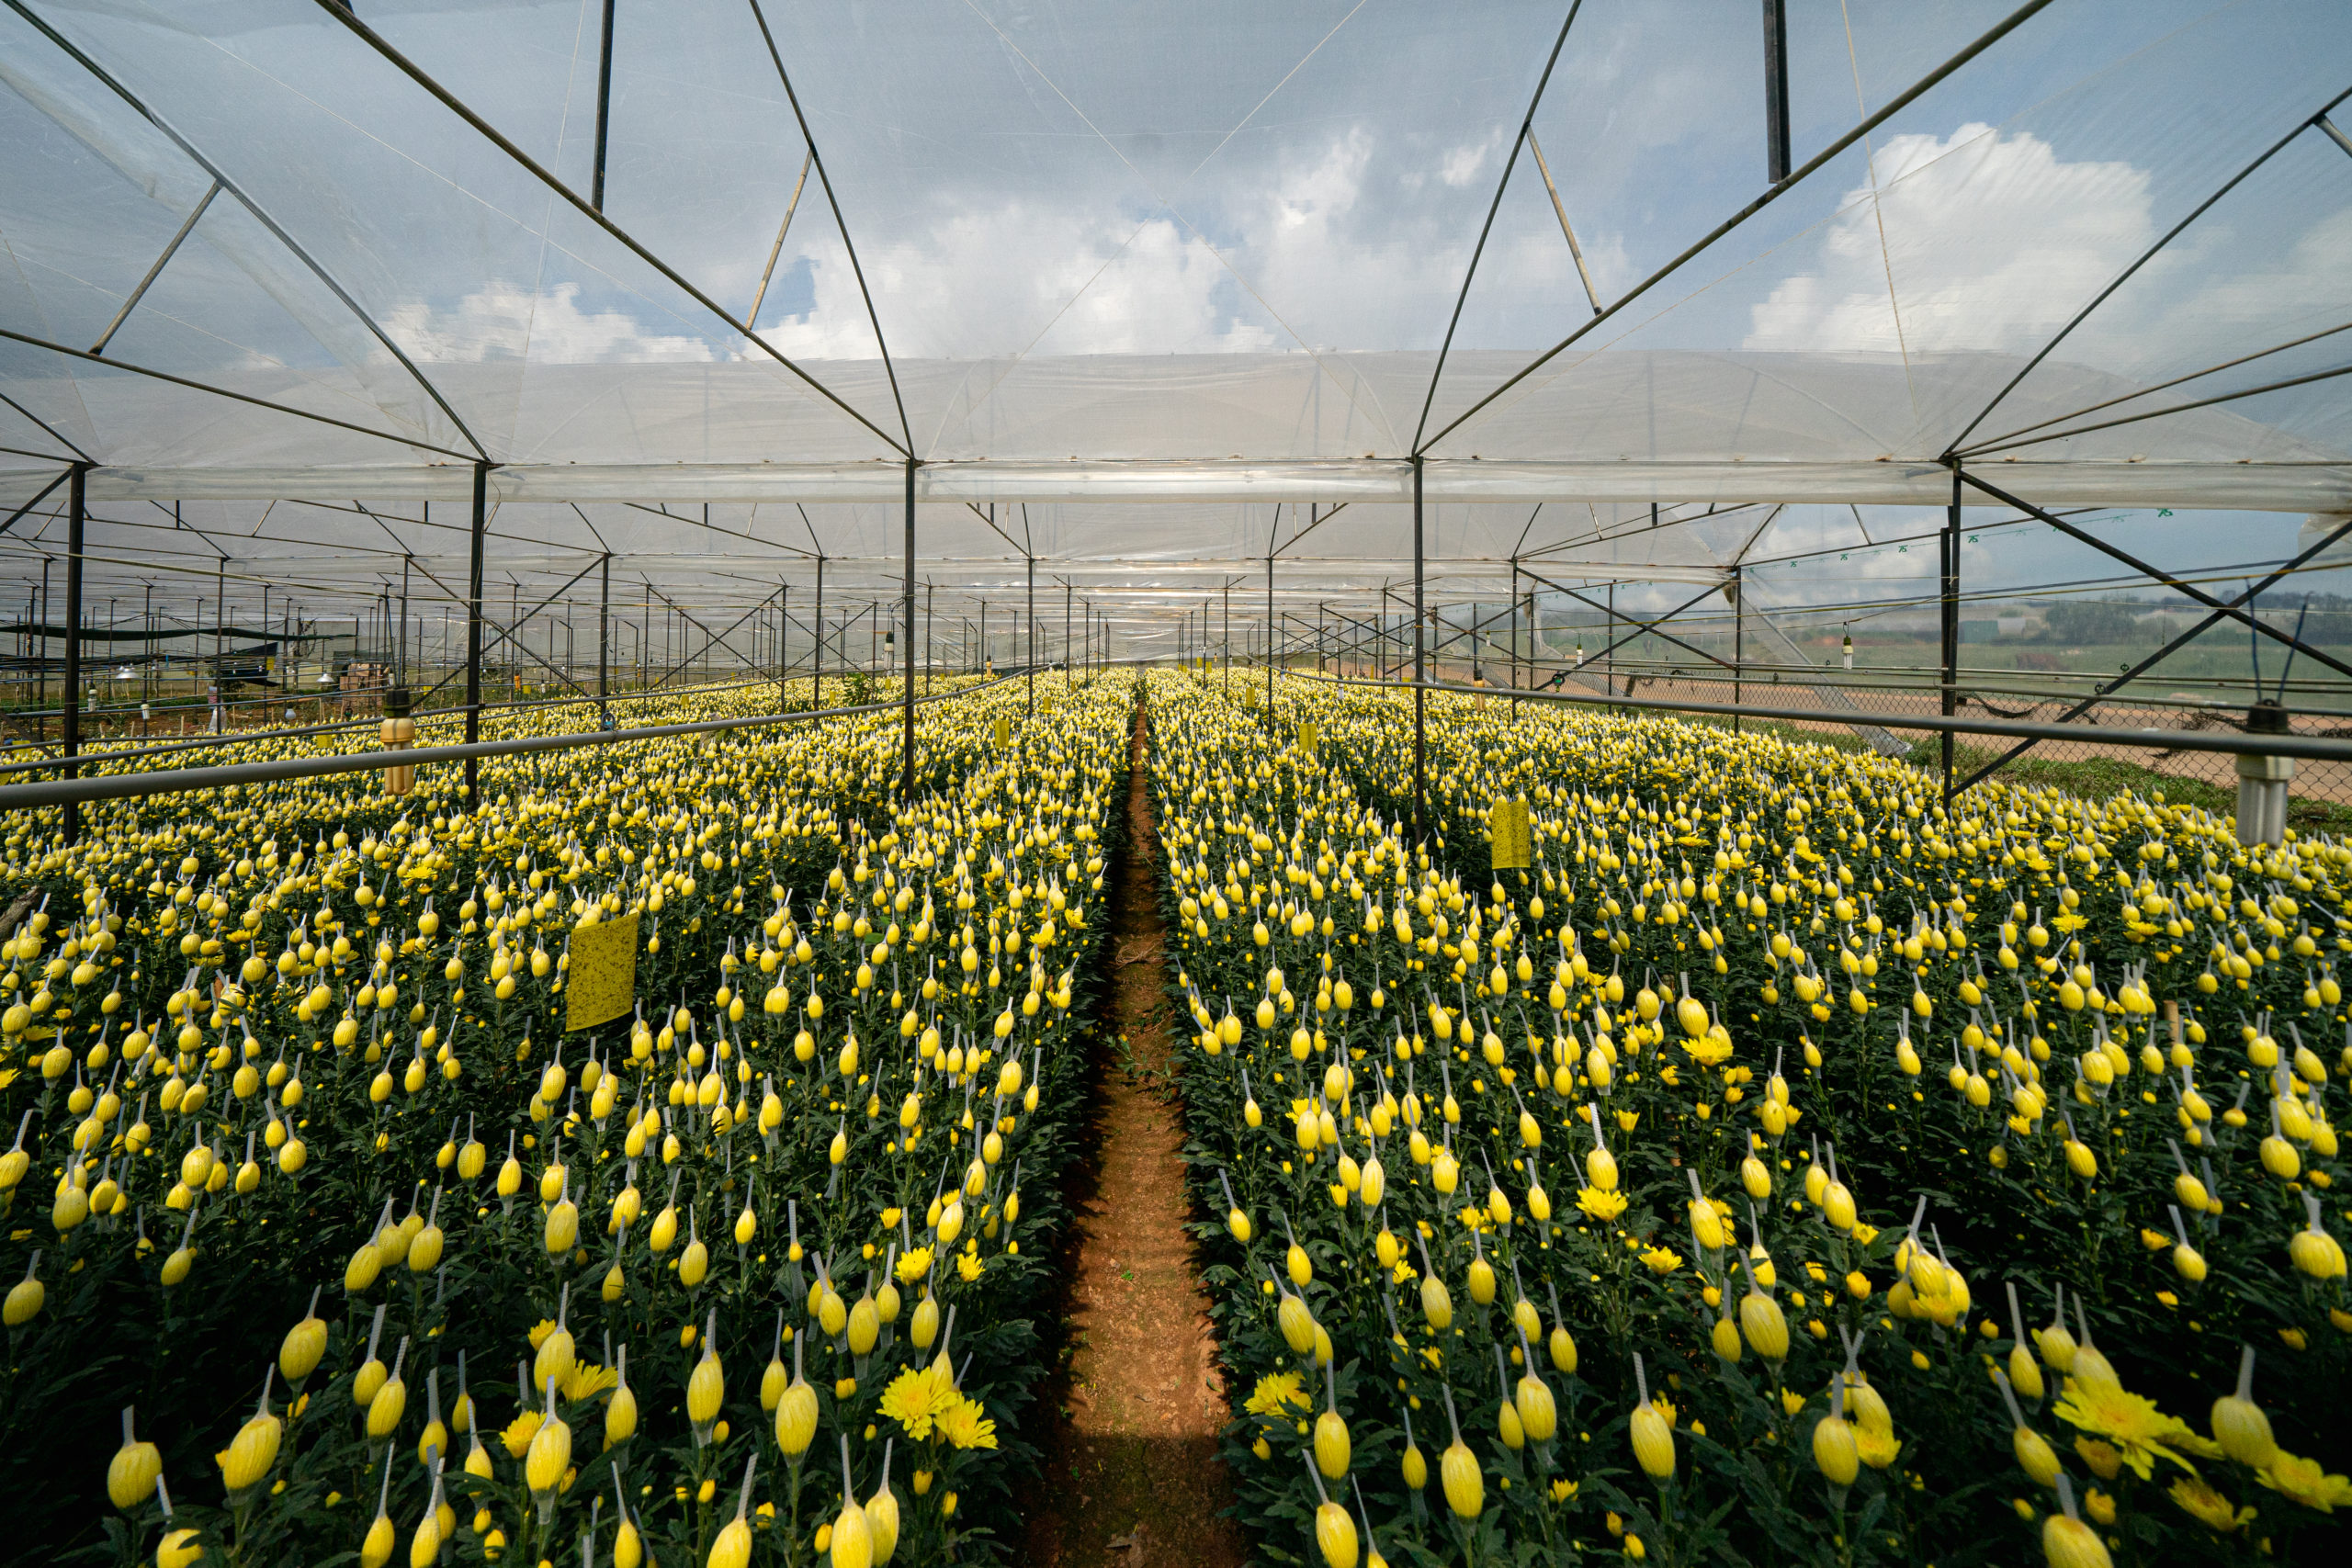 <p><span style="font-weight: 400;">In flower-filled greenhouses in Dalat, Vietnam, each bloom is wrapped in a plastic net to maintain its shape (Image: </span><a href="https://www.instagram.com/itscthinh/?hl=en"><span style="font-weight: 400;">Thinh Doan</span></a><span style="font-weight: 400;">)</span></p>